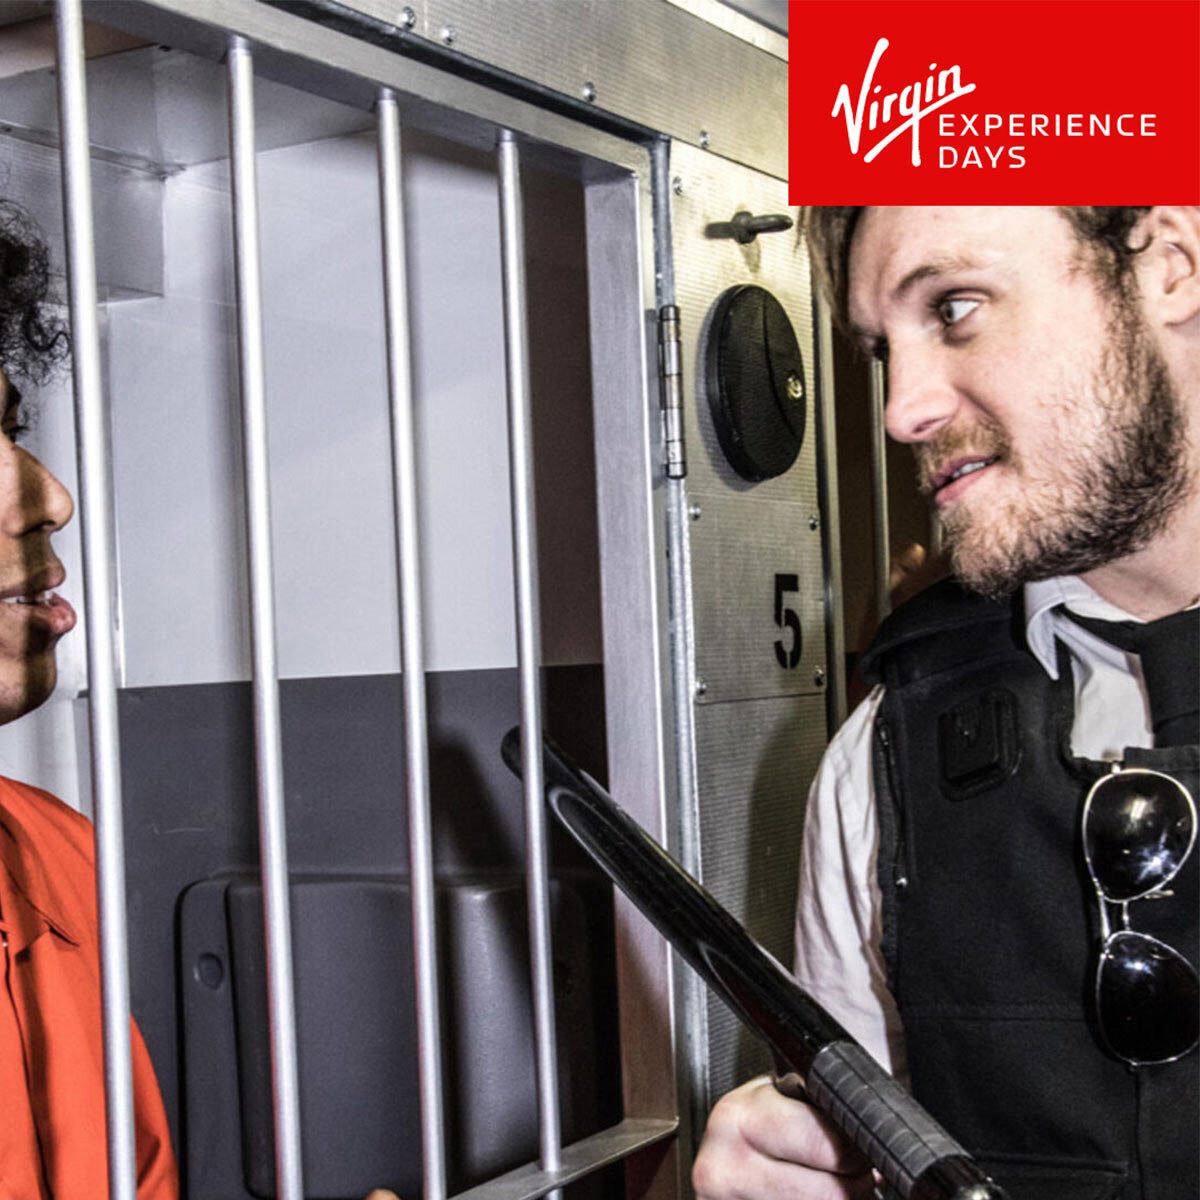 Virgin Experience Days Prison Van Escape Room For Two People (14 Years +)